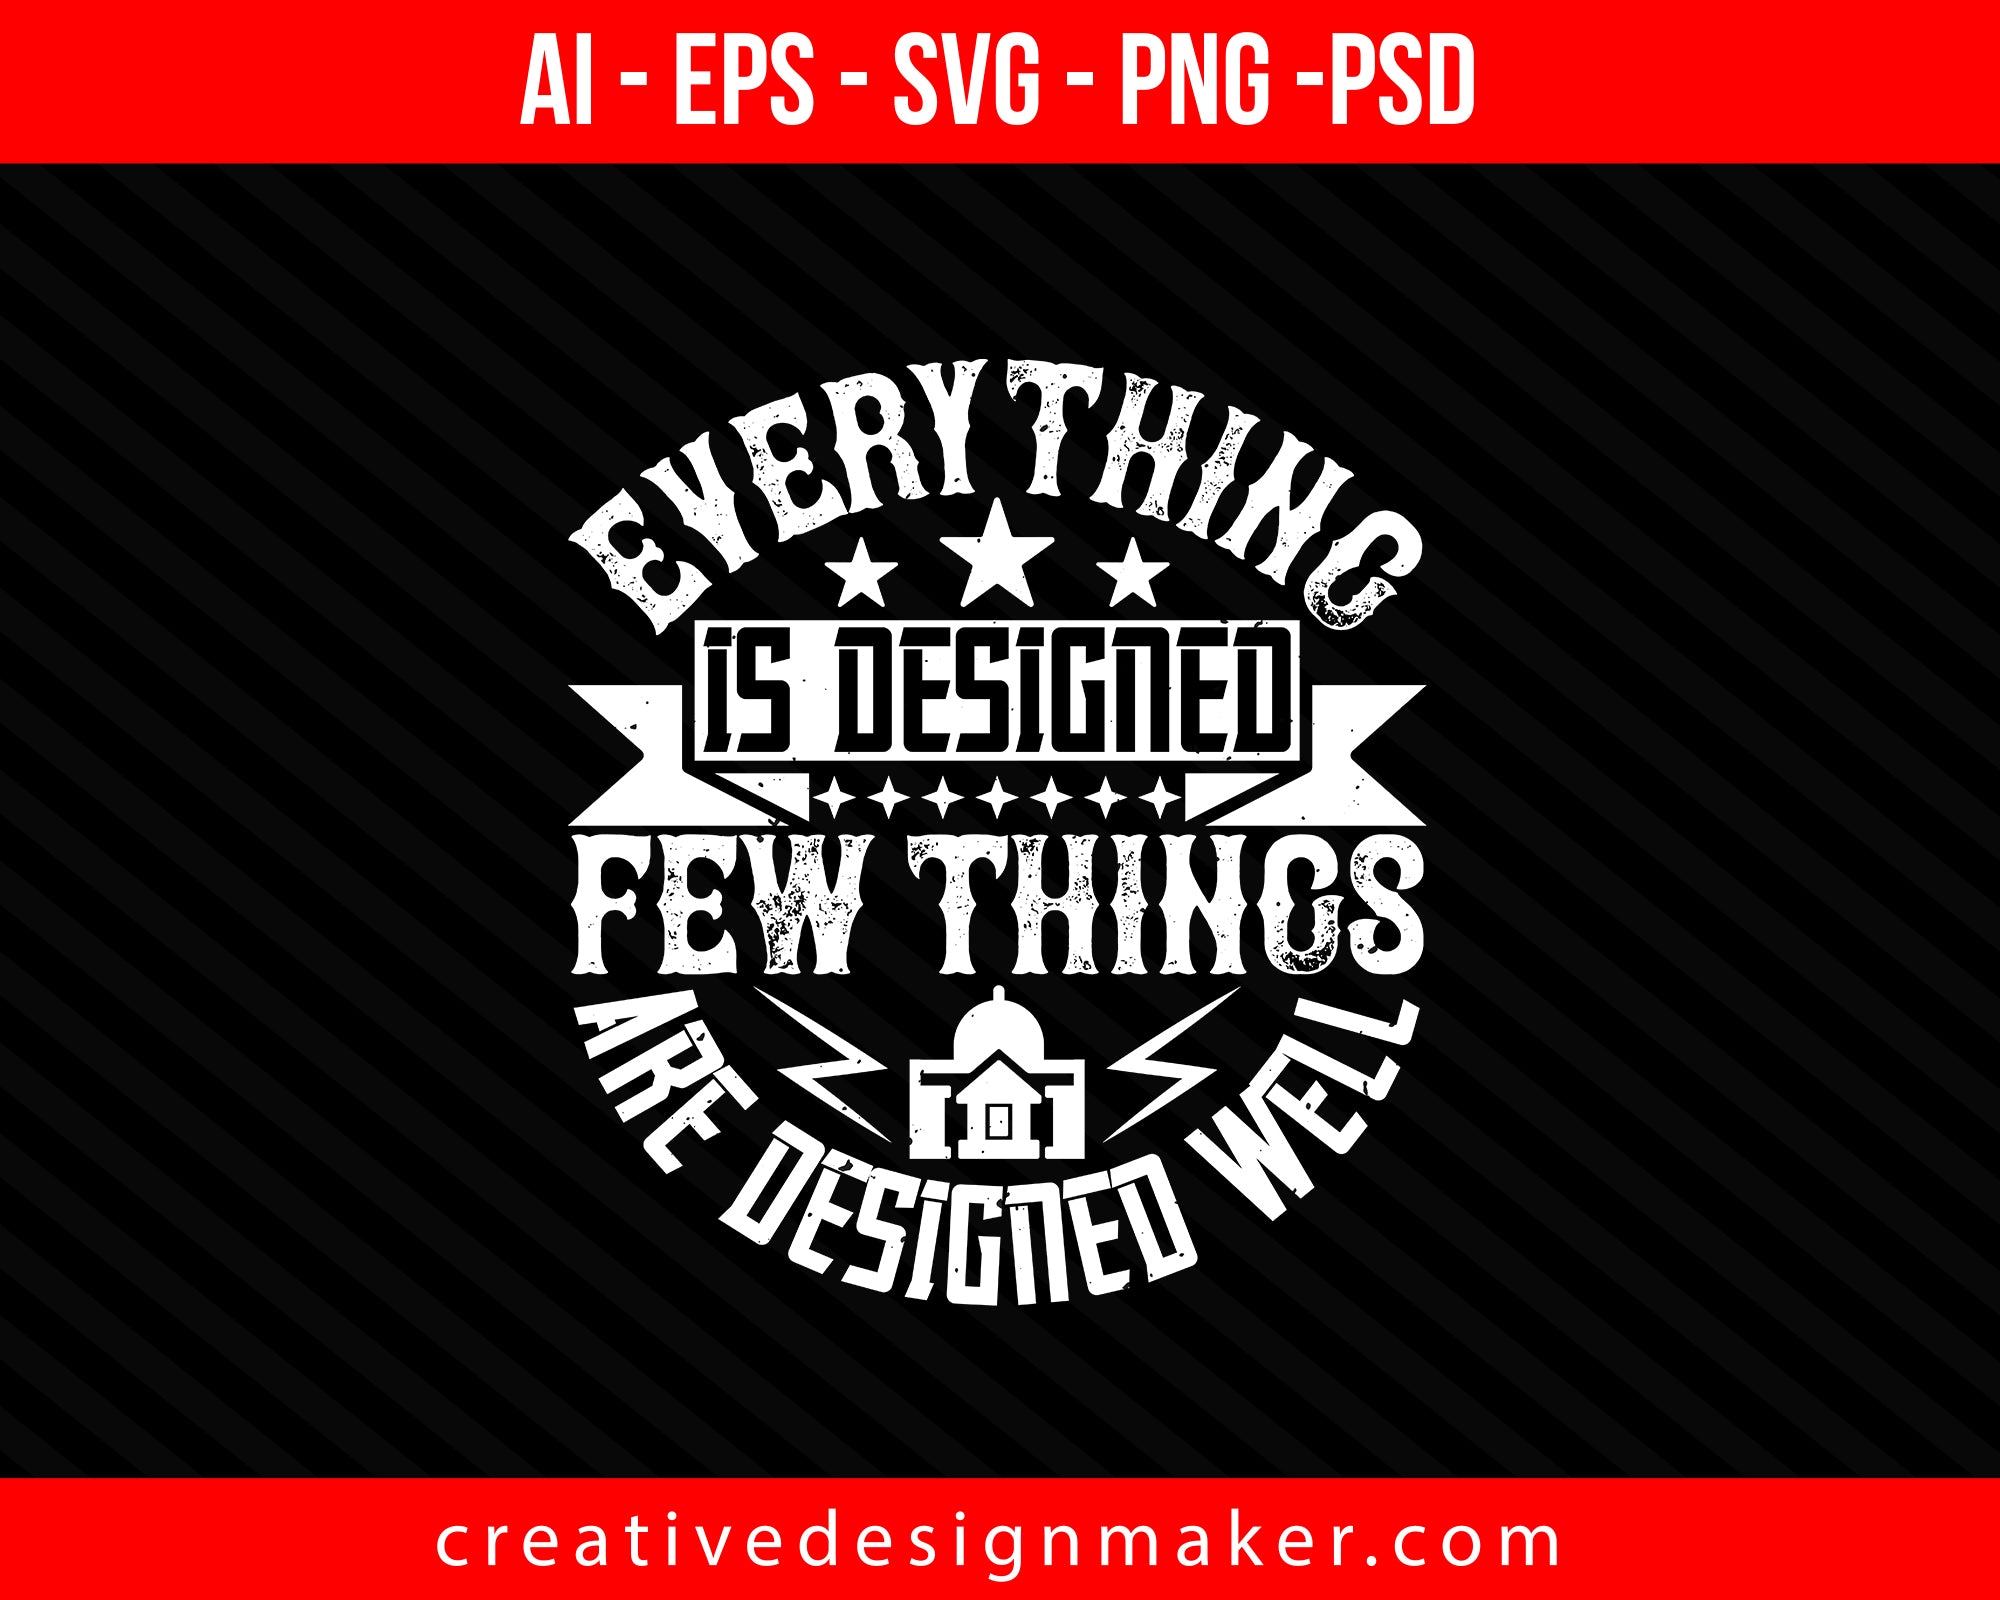 Everything is designed. Few things Architect Print Ready Editable T-Shirt SVG Design!